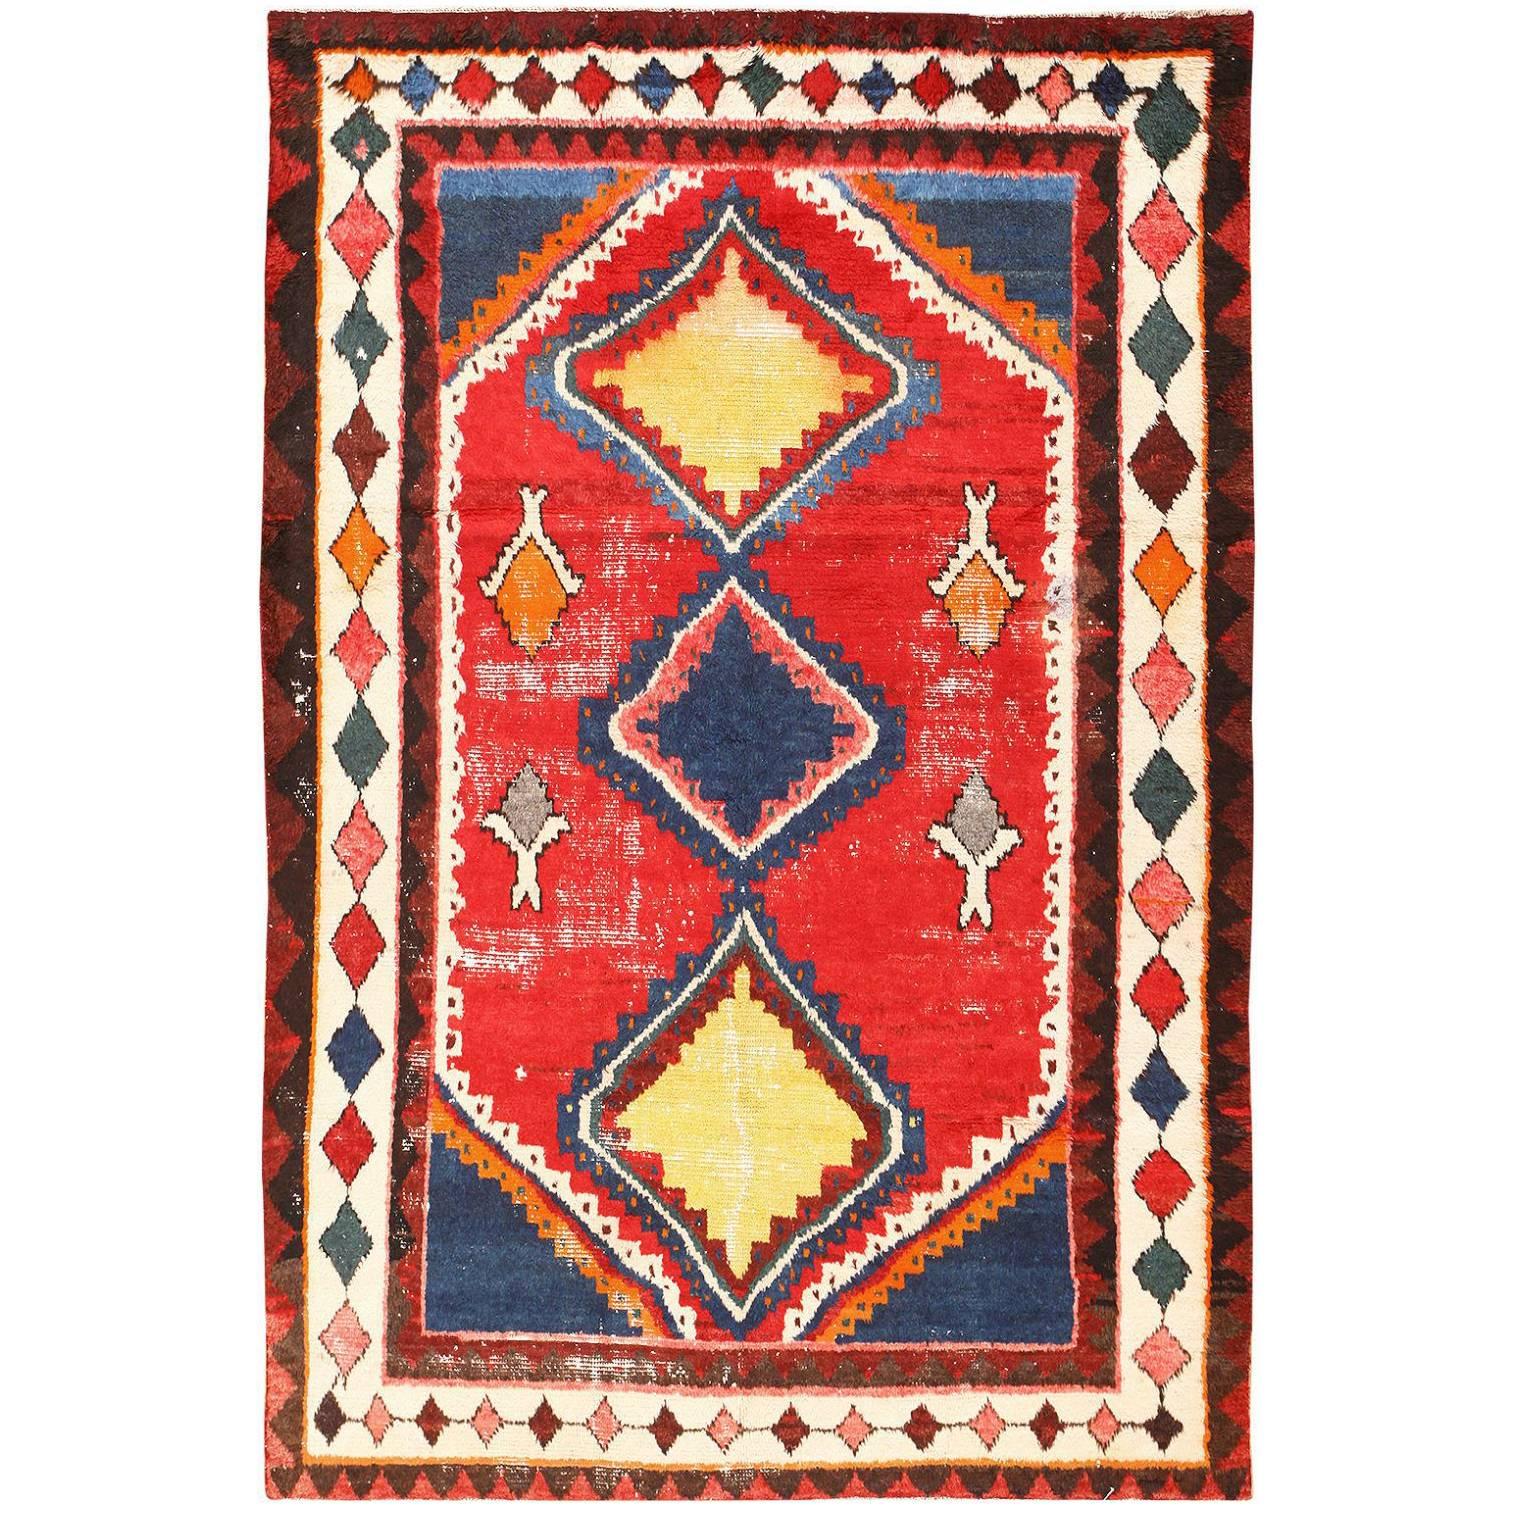 Colorful Shabby Chic Vintage Persian Gabbeh Rug